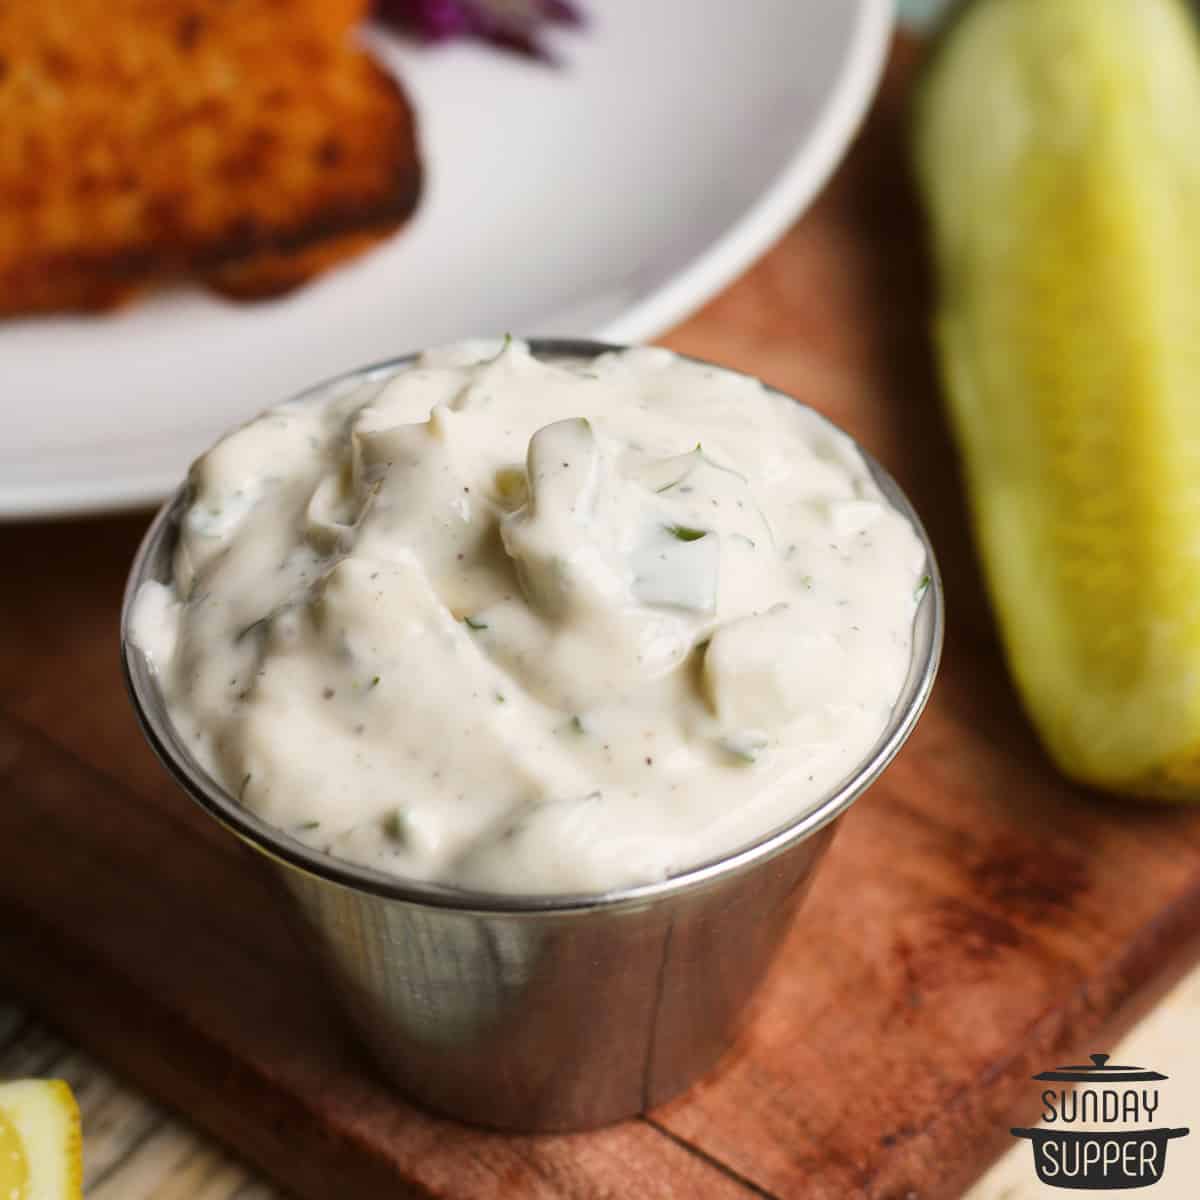 a metal dish of tartar sauce with dill pickles